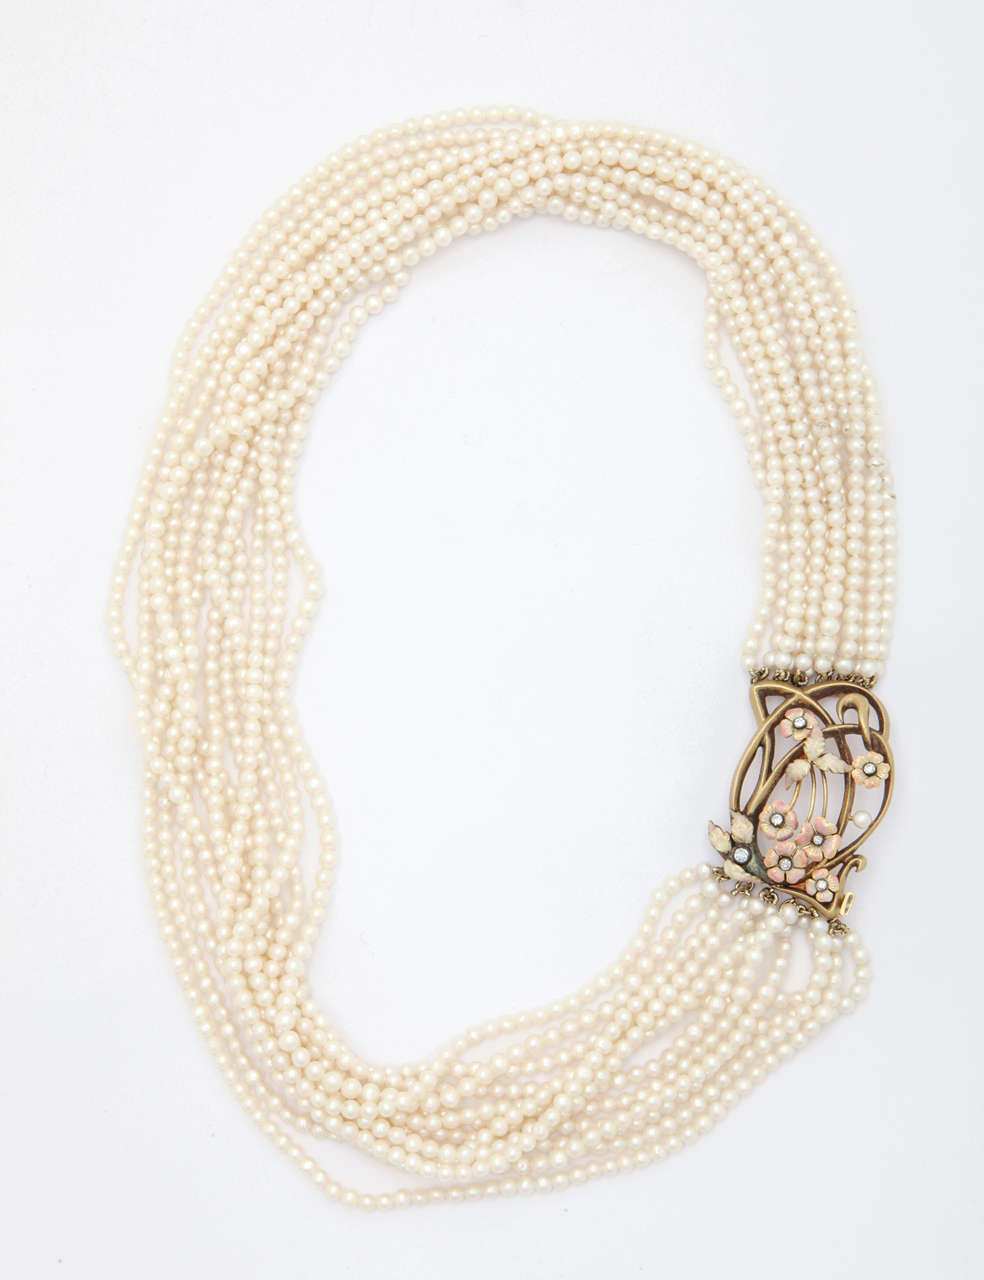 This soft, feminine 12 strand, 3mm round fresh water pearl necklace is timeless and drapes beautifully around the neck.

The handmade clasp is adorned with flowers and leaves that are enameled with opalescent and peachy-pink  enamels. The gold is